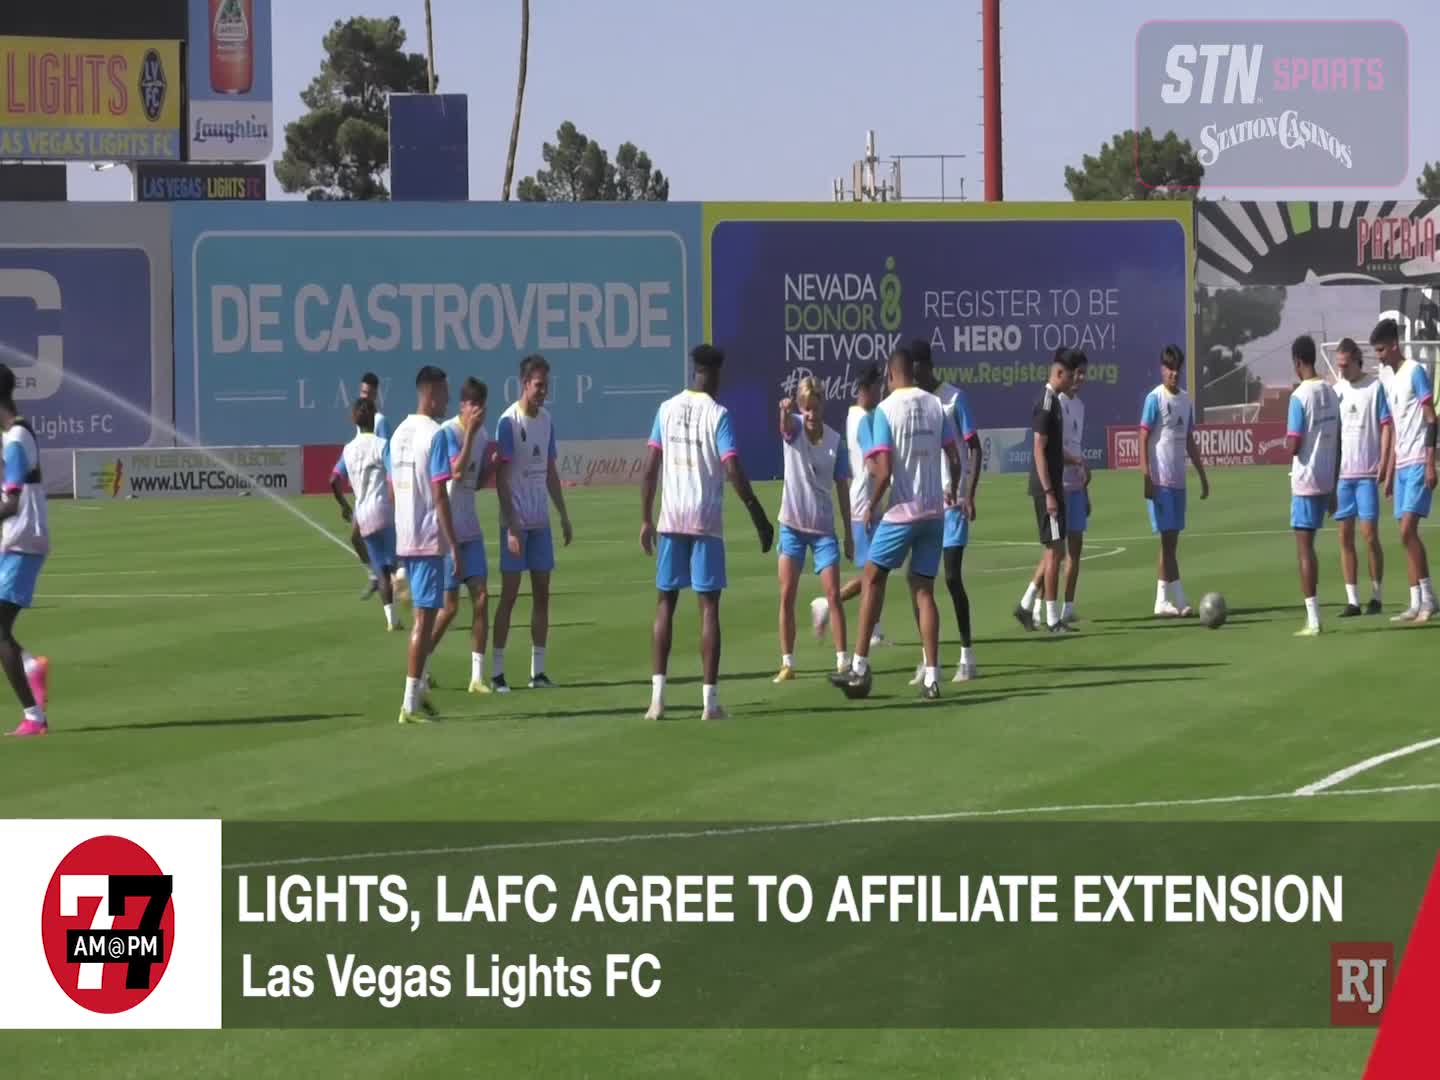 7@7PM Light, LAFC Agree to Affiliate Extension